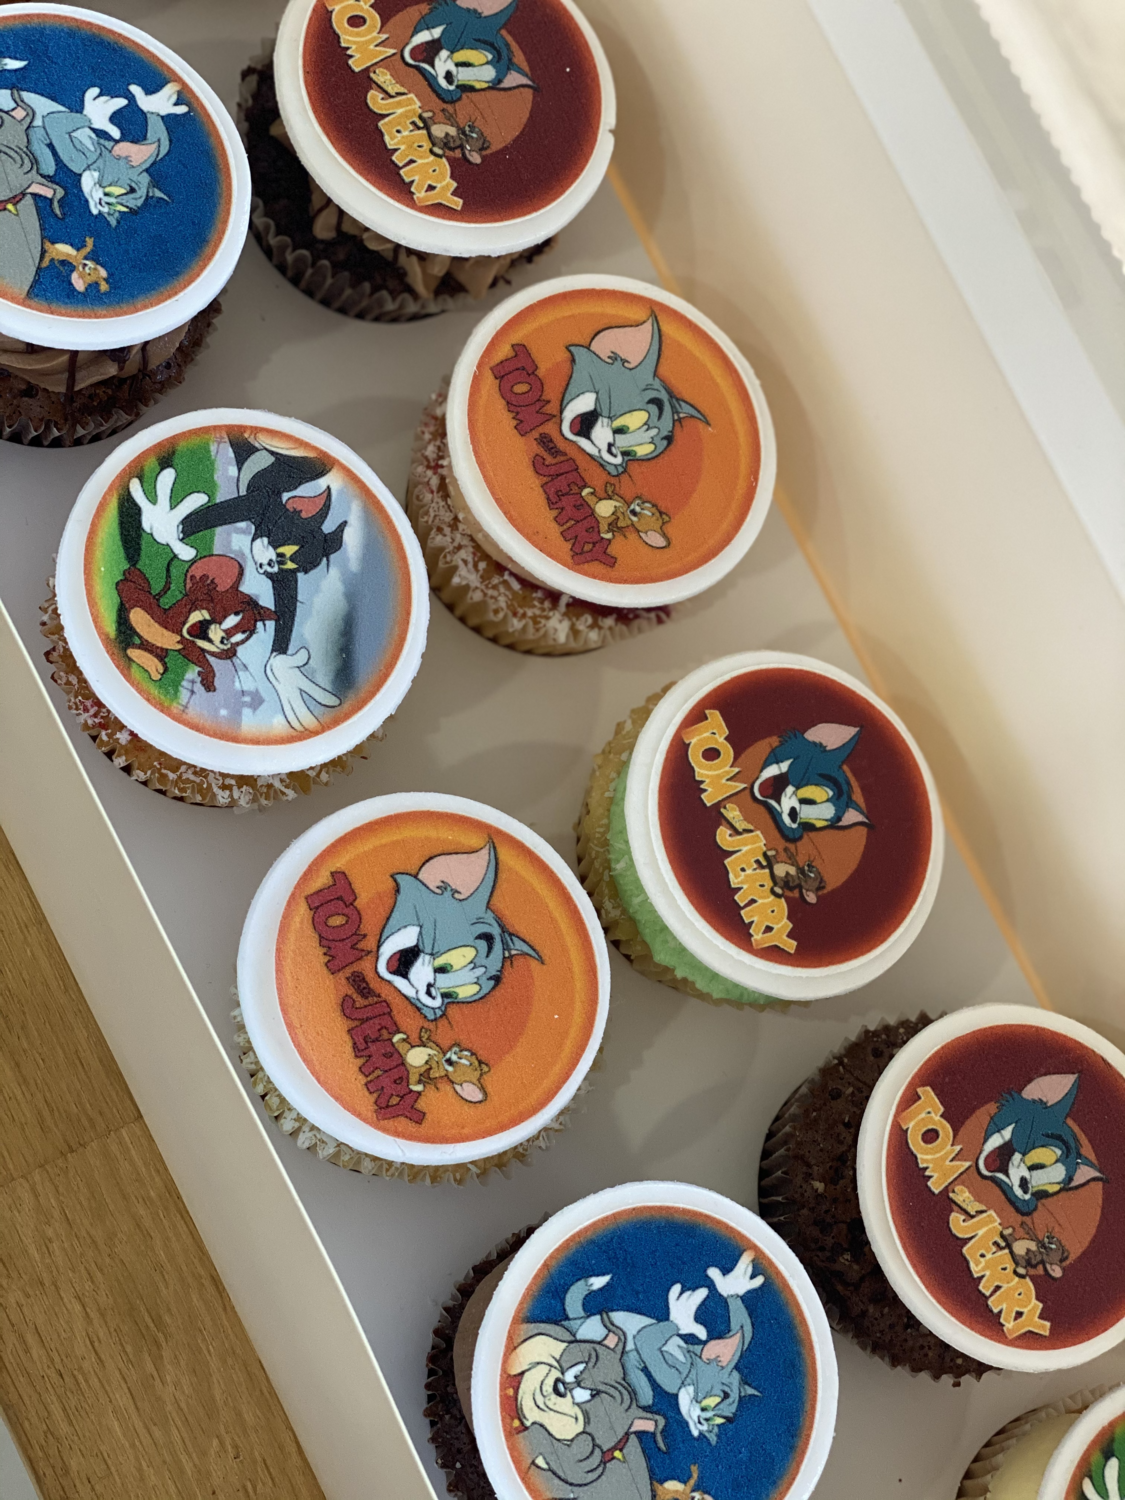 Themed Cupcakes